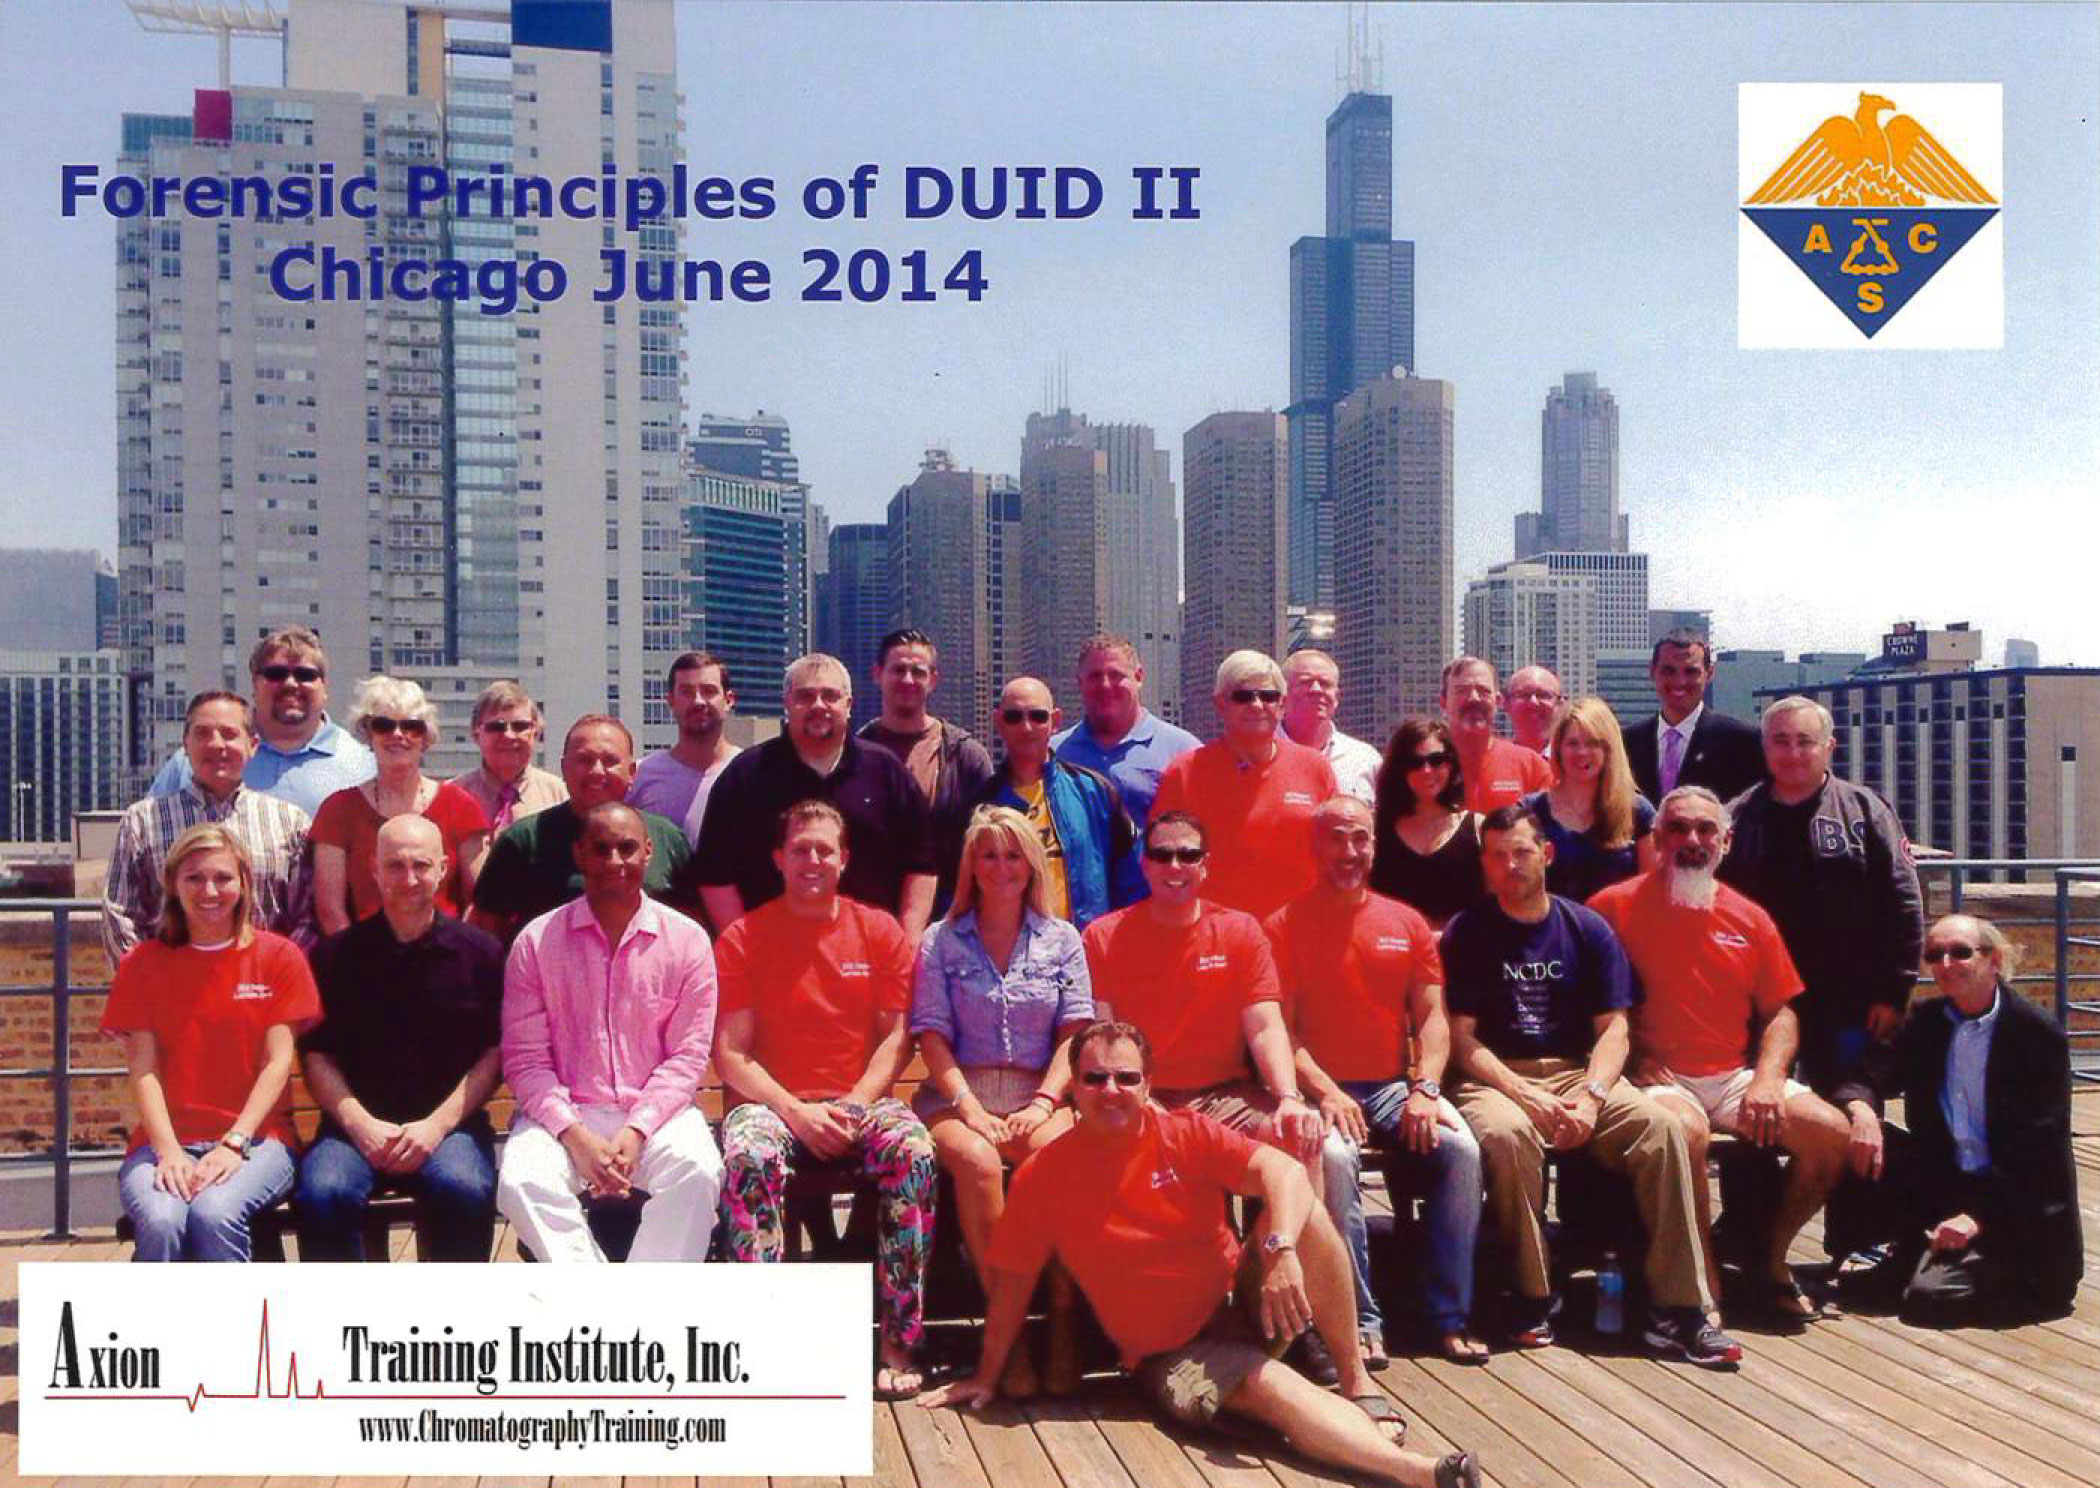 Group of attorneys on Forensic Principles of DUID II